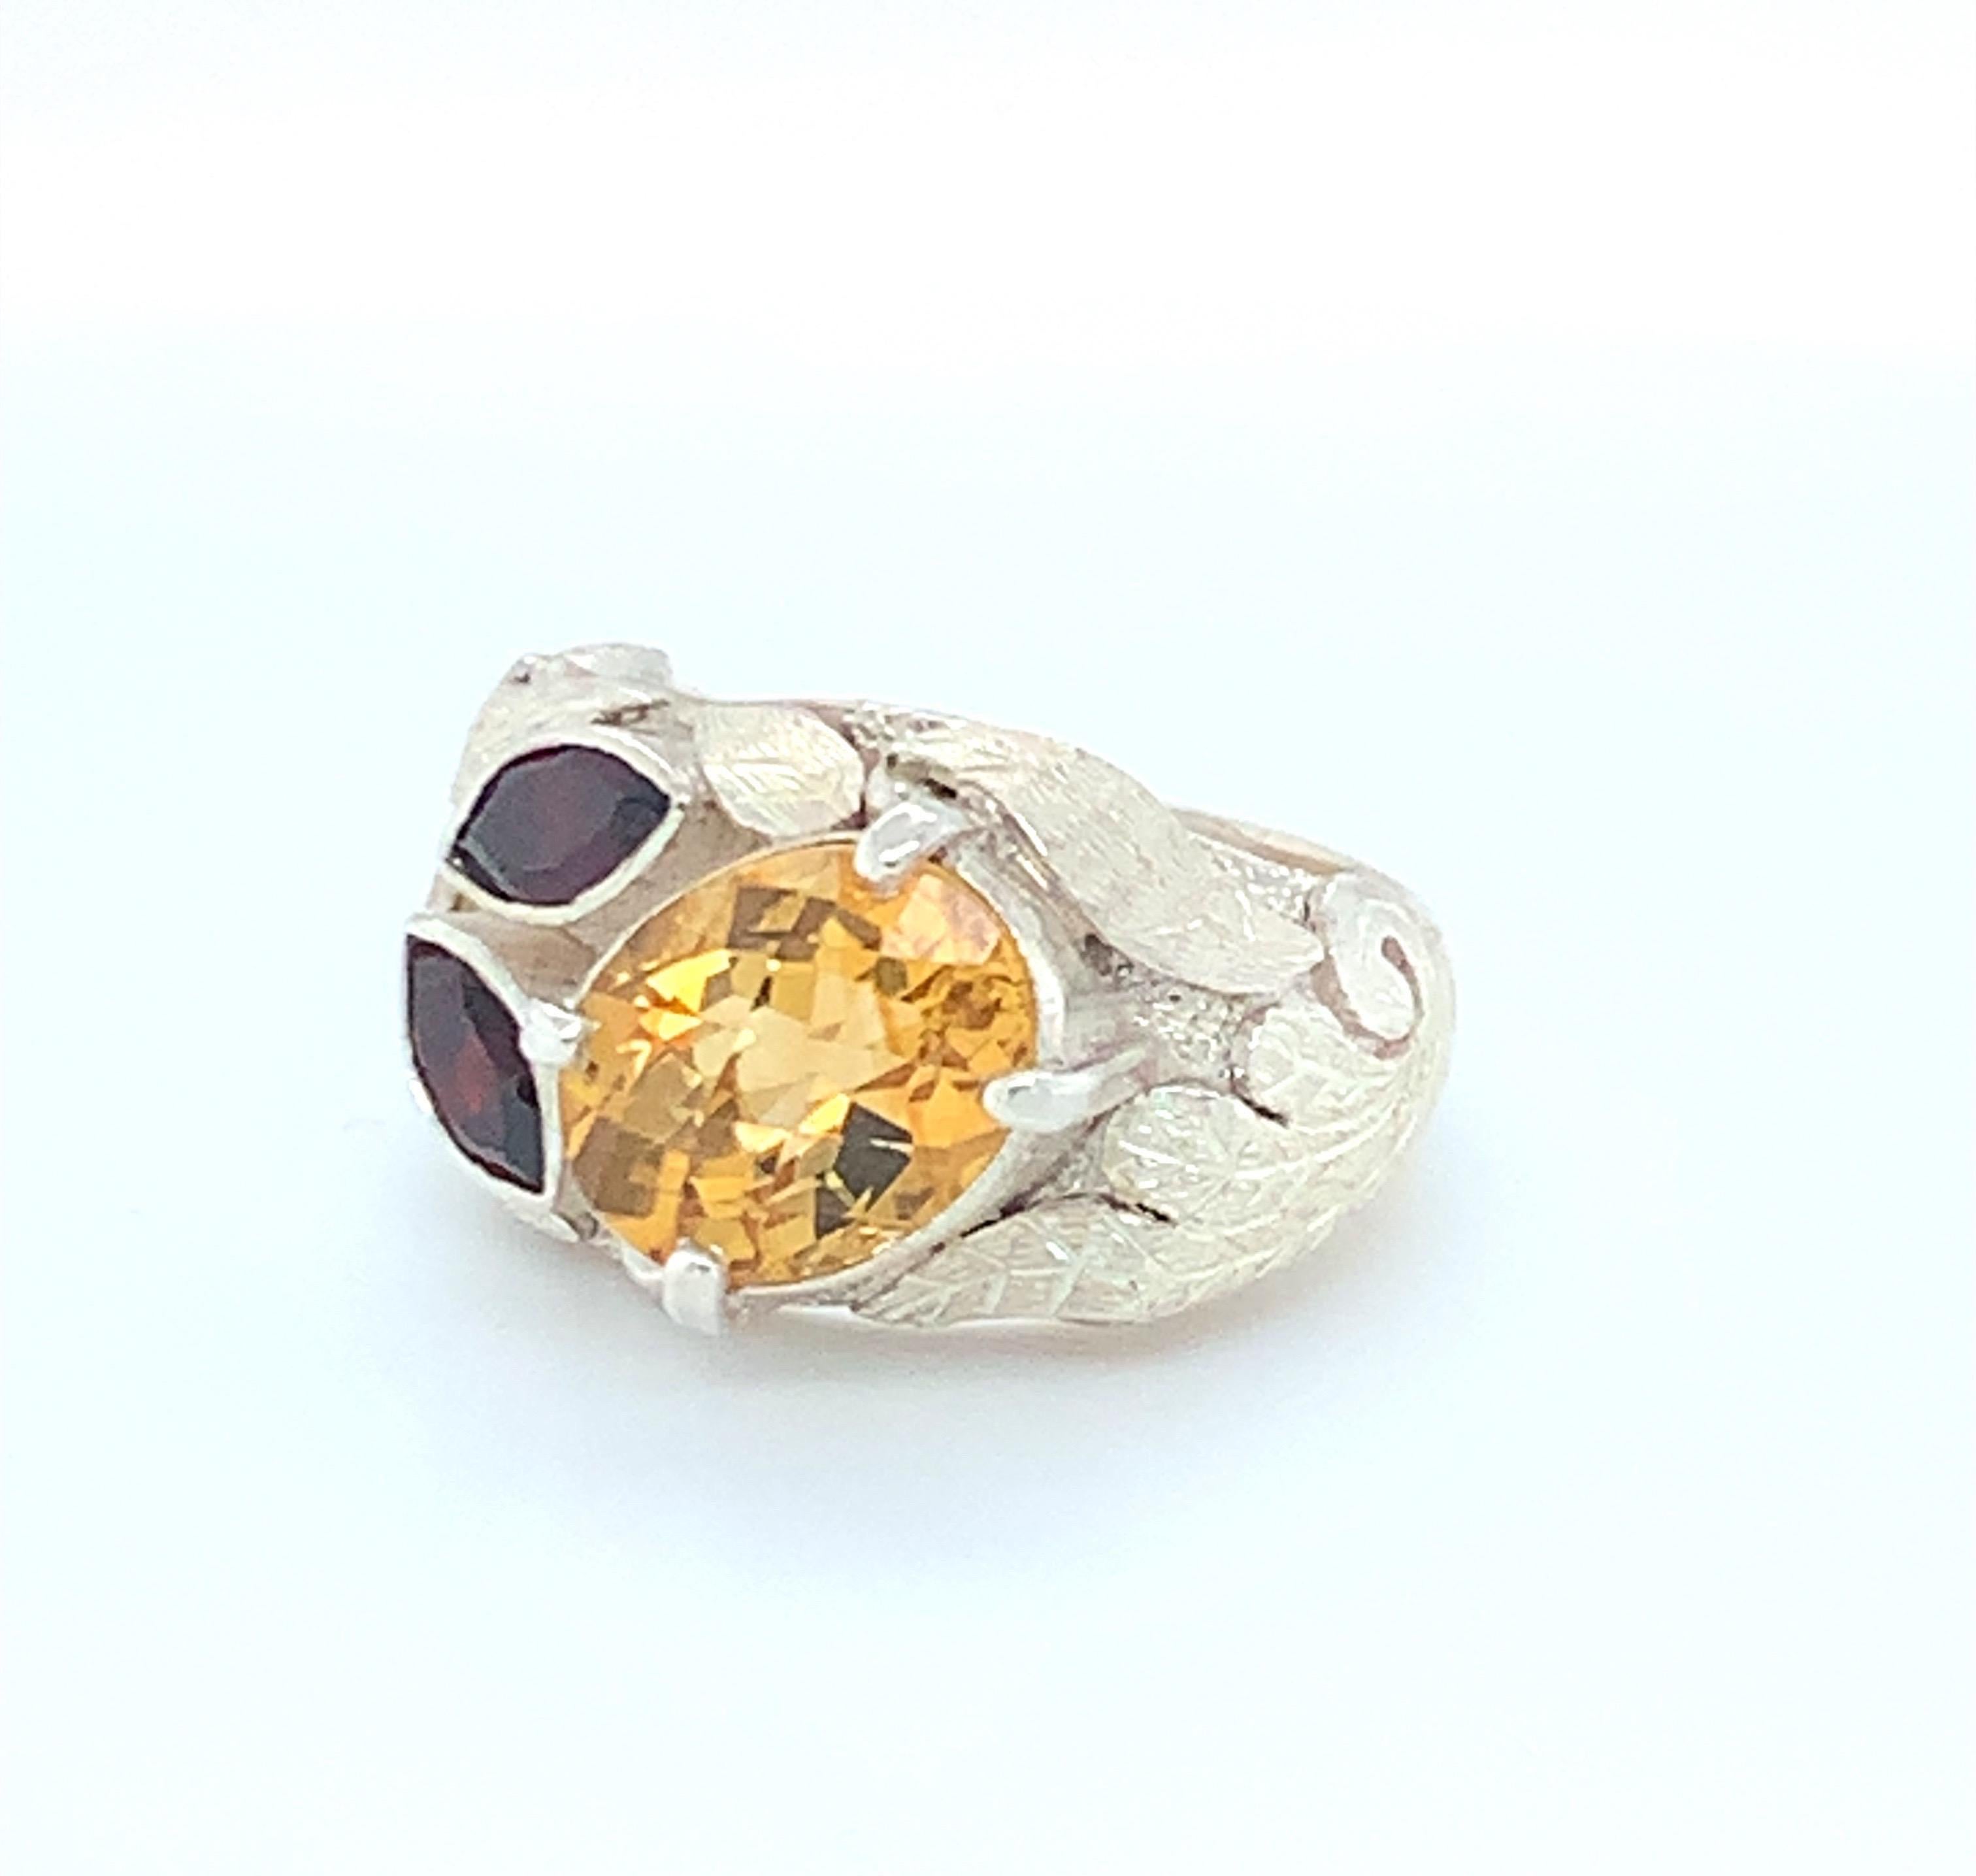 Oval checkerboard citrine with four prongs is set diagonally next to two marque garnets. The contrast of yellow and red gem stones and the intricate leaf pattern of hand-work gives this cocktail ring a unique character. This ring is handmade and set